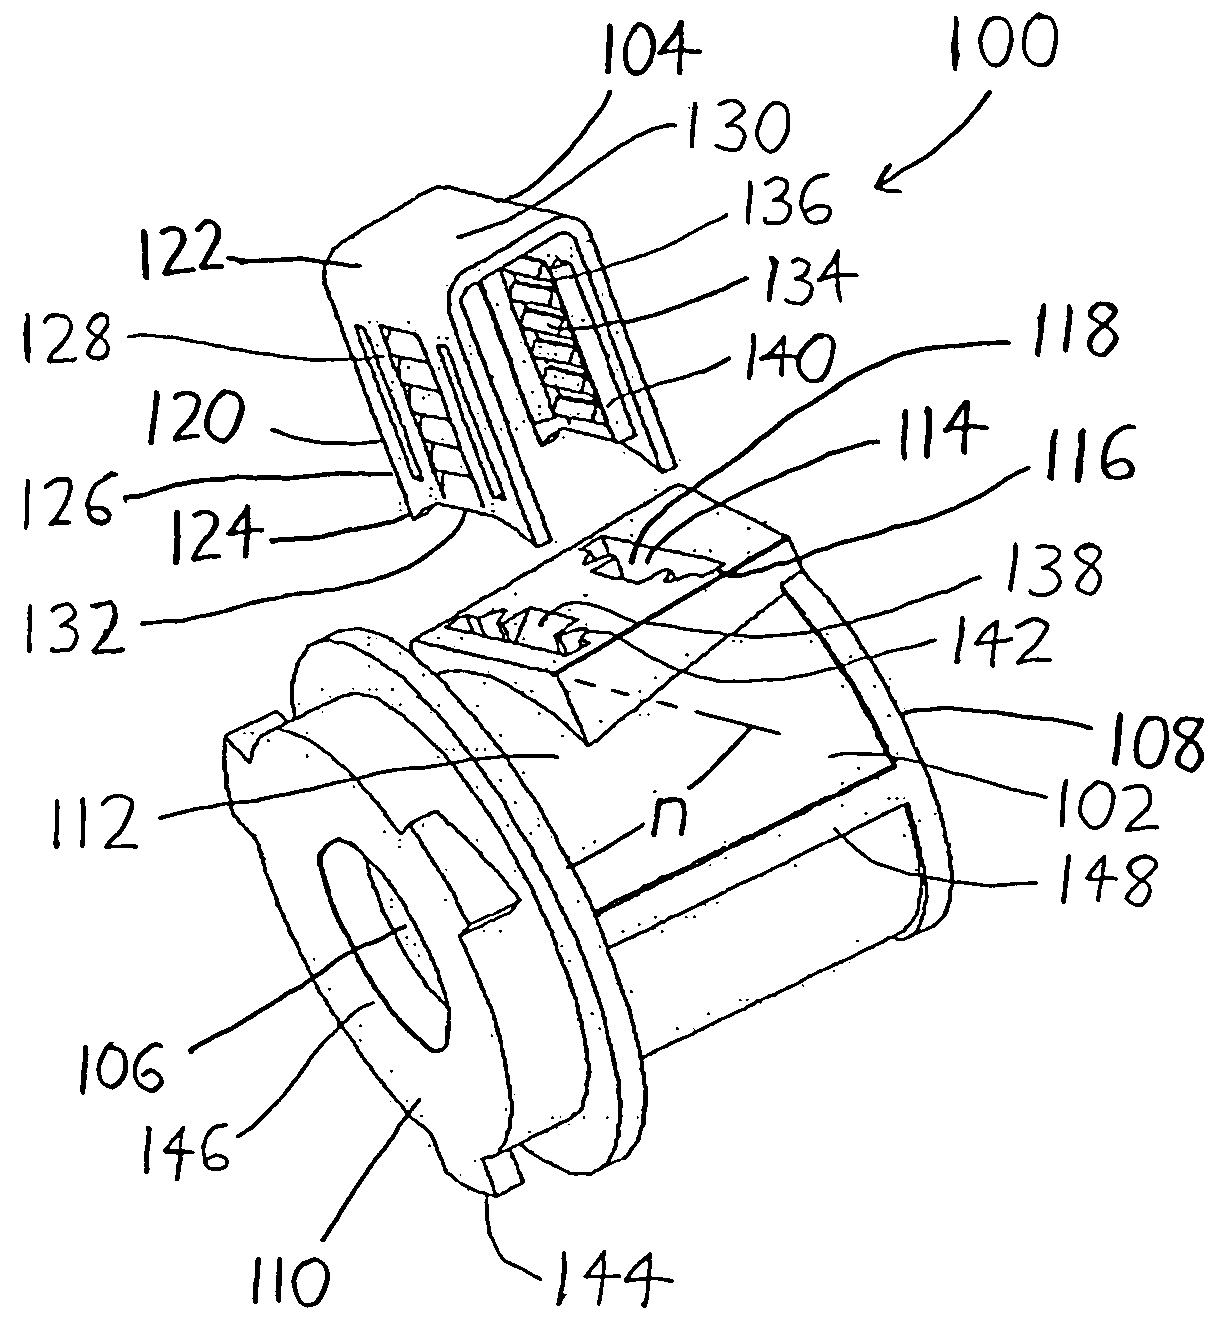 Connector for affixing cables within junction boxes